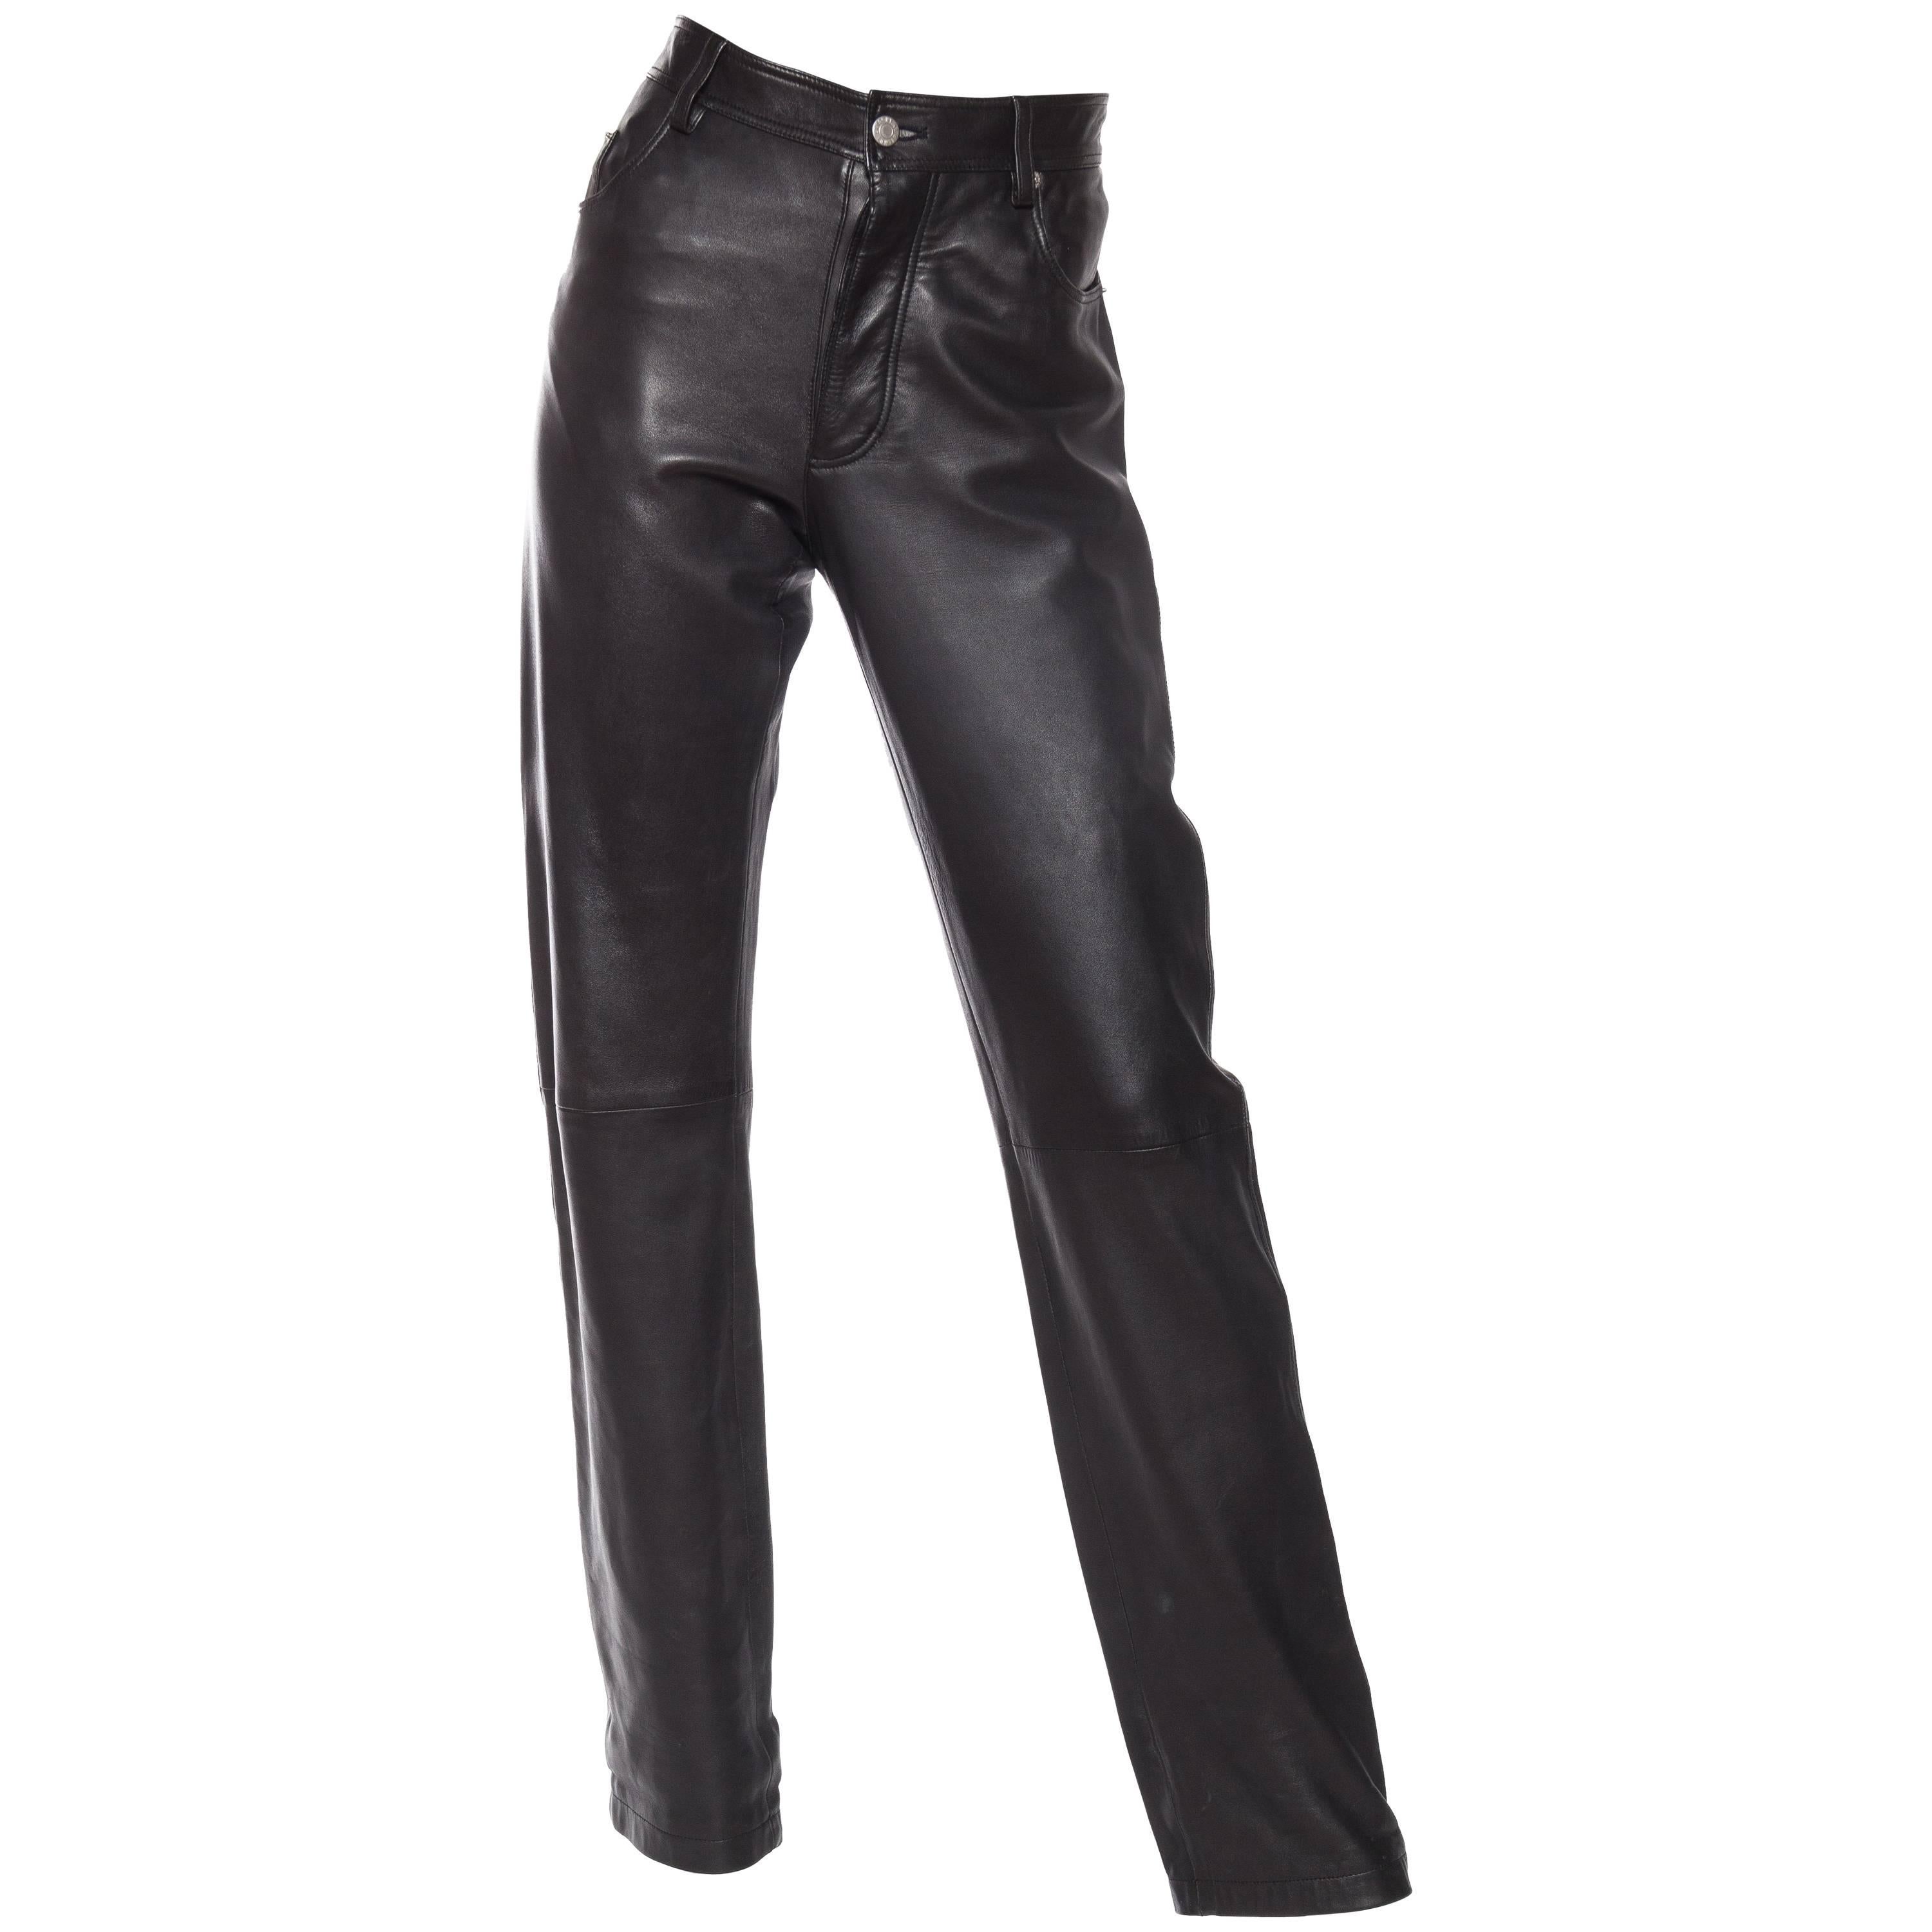 The Perfect Leather Pants from Helmut Lang